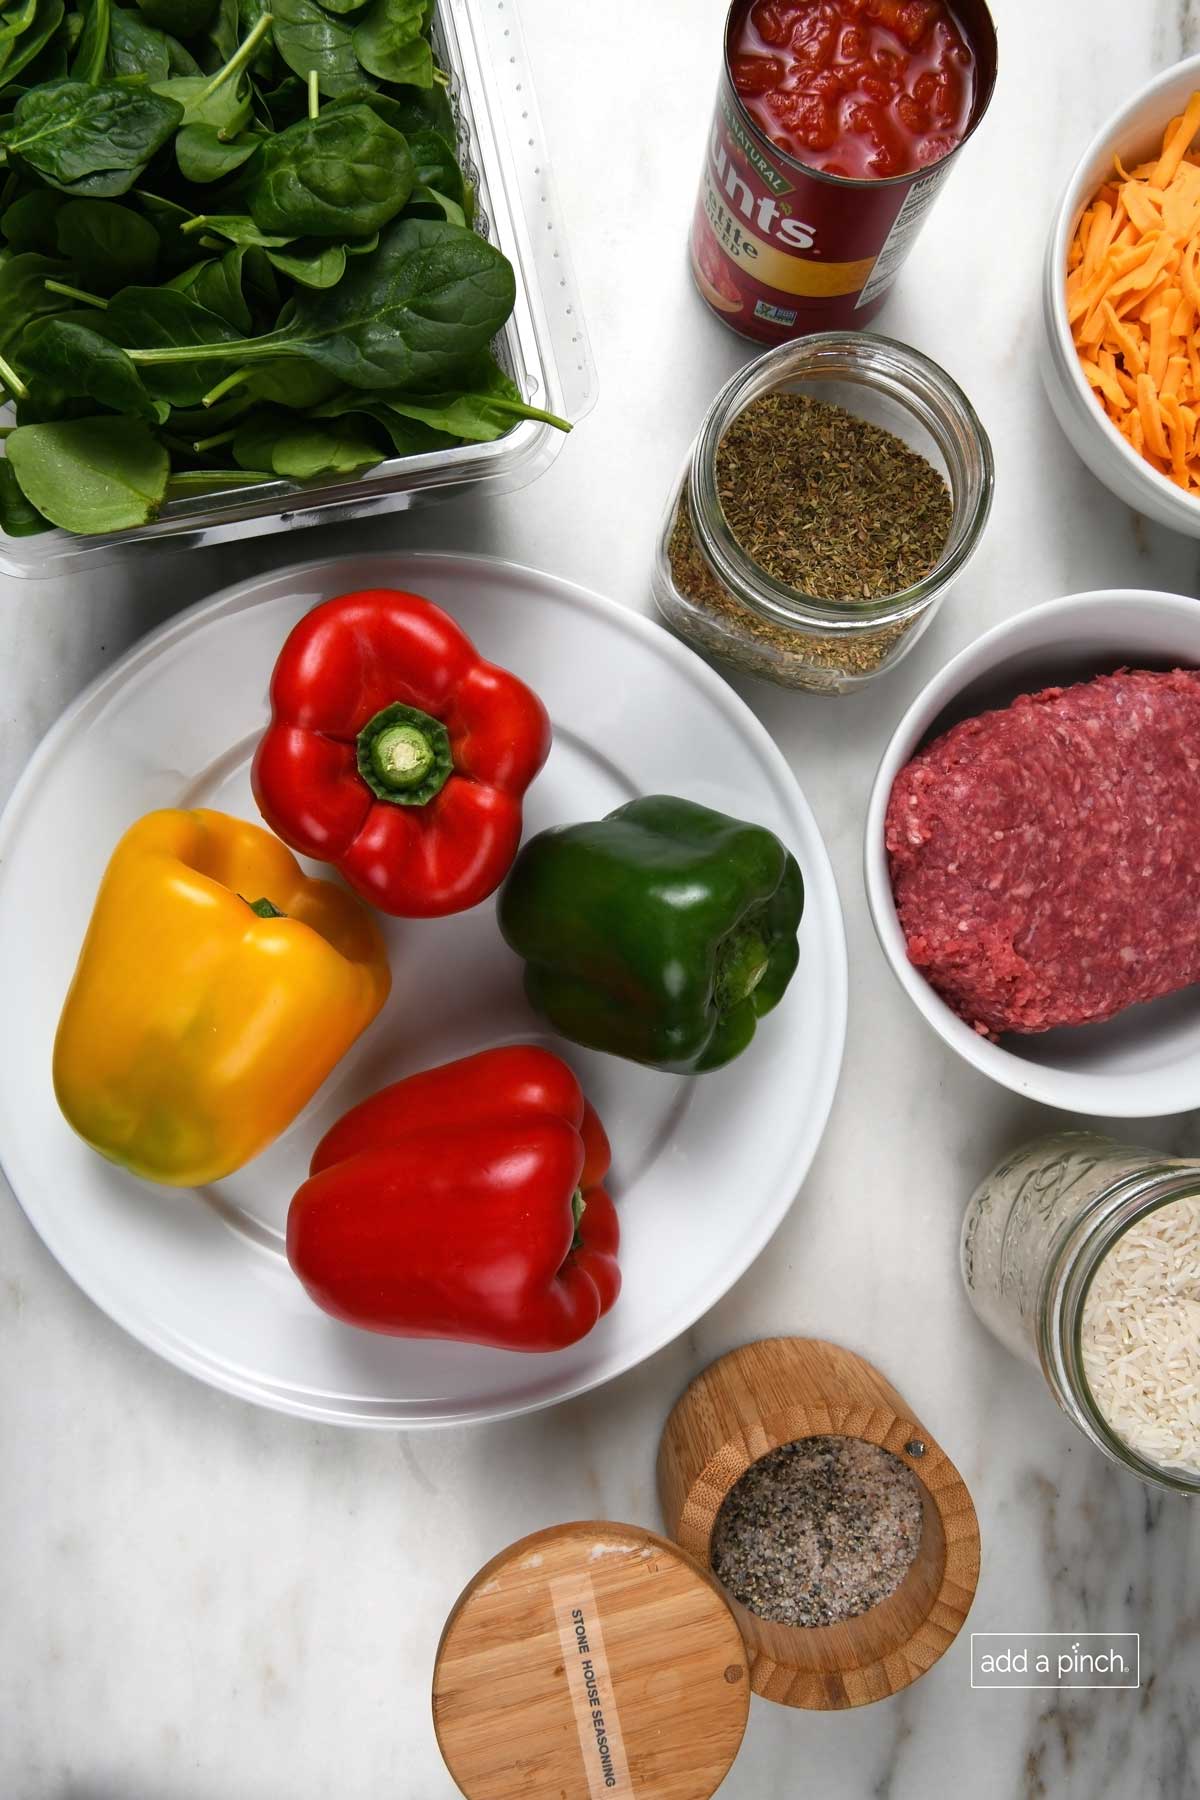 Ingredients used to make easy stuffed peppers recipe.